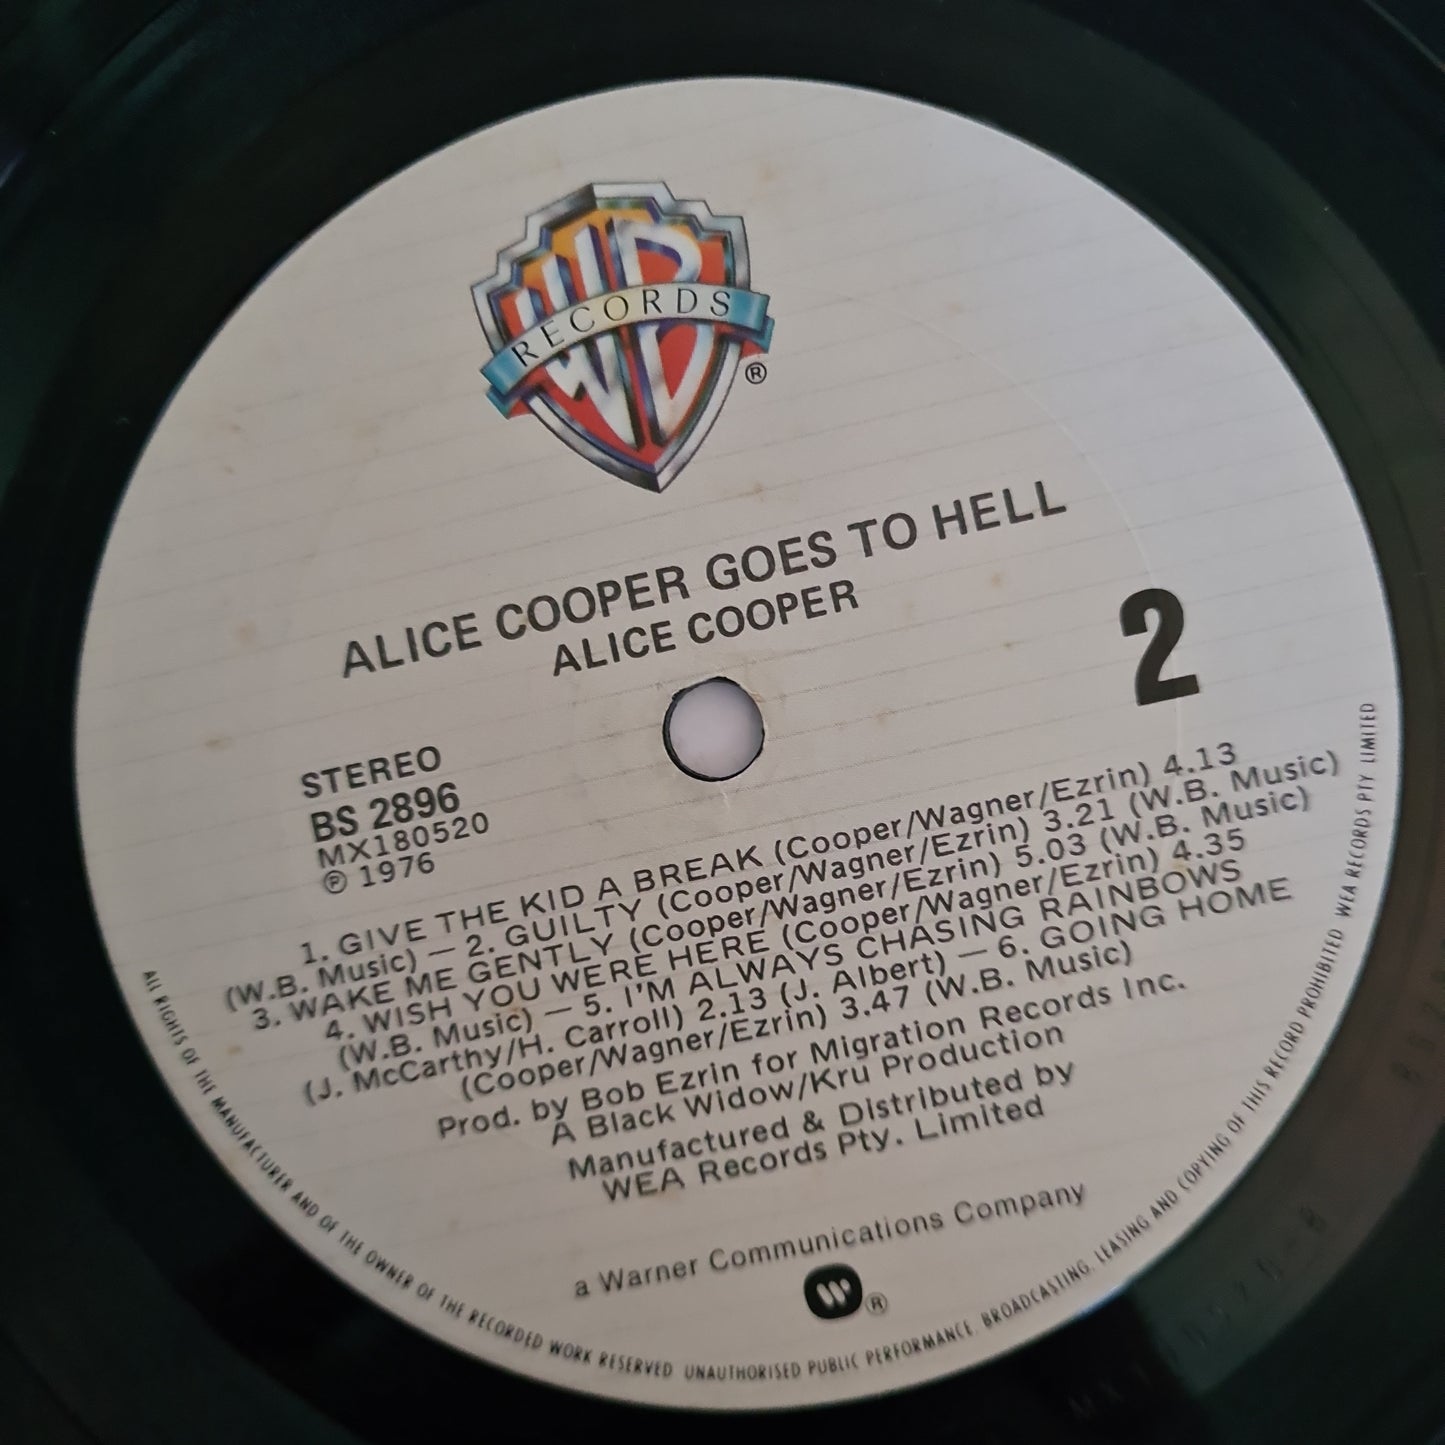 Alice Cooper – Goes To Hell - 1976 - Vinyl Record